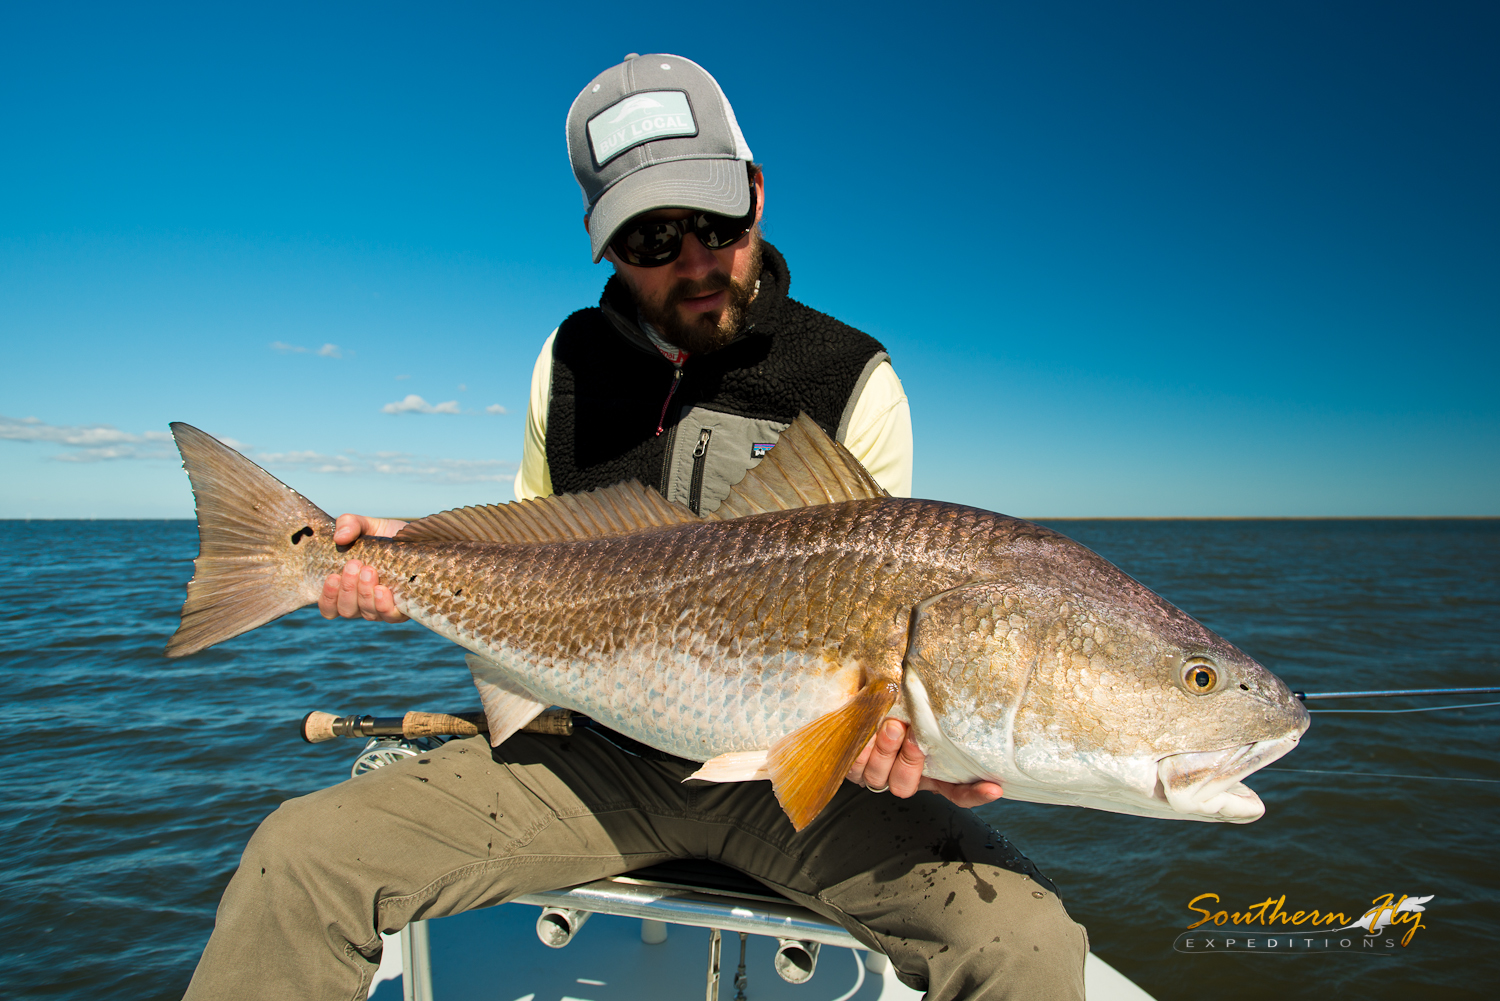 Southern Fly Expeditions fly fishing guide and light tackle guide in new orleans and southern louisiana 